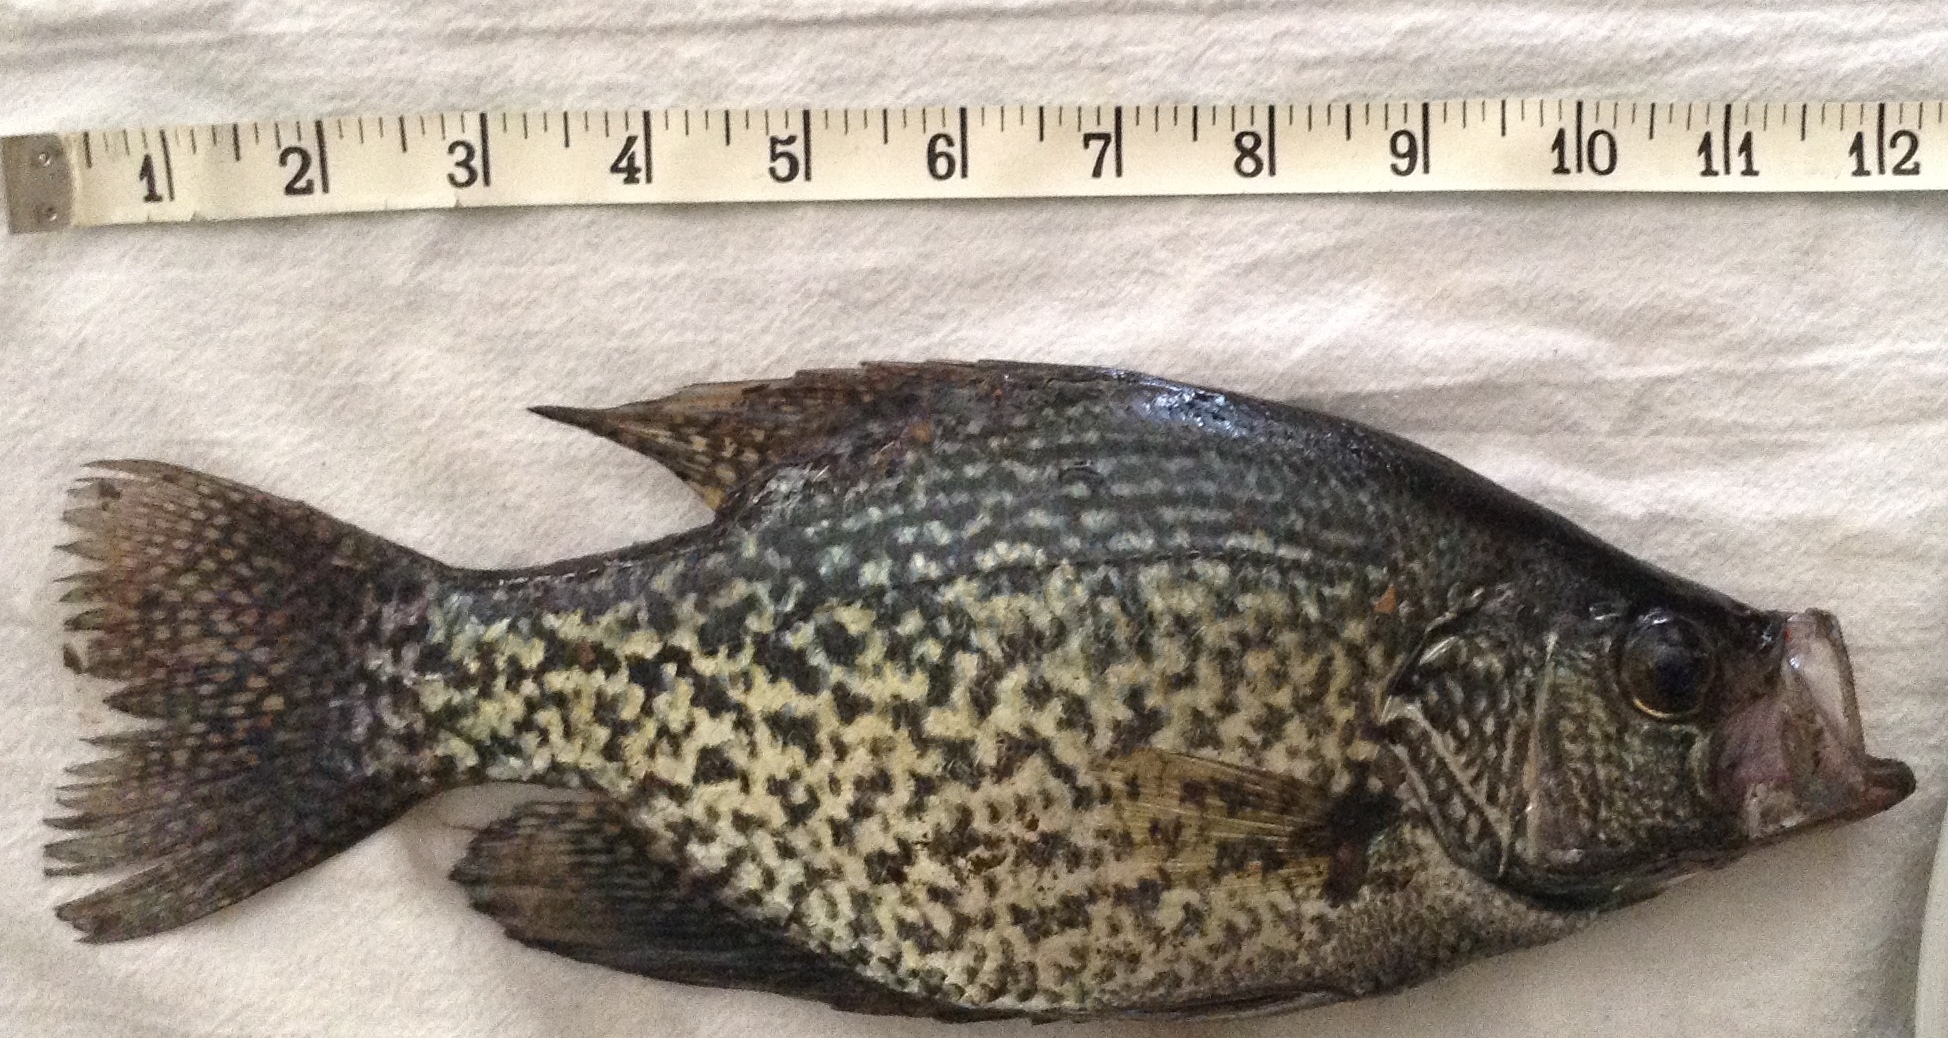 The Magic of Milford: Spring Crappie, White Bass Fishing in - Game & Fish